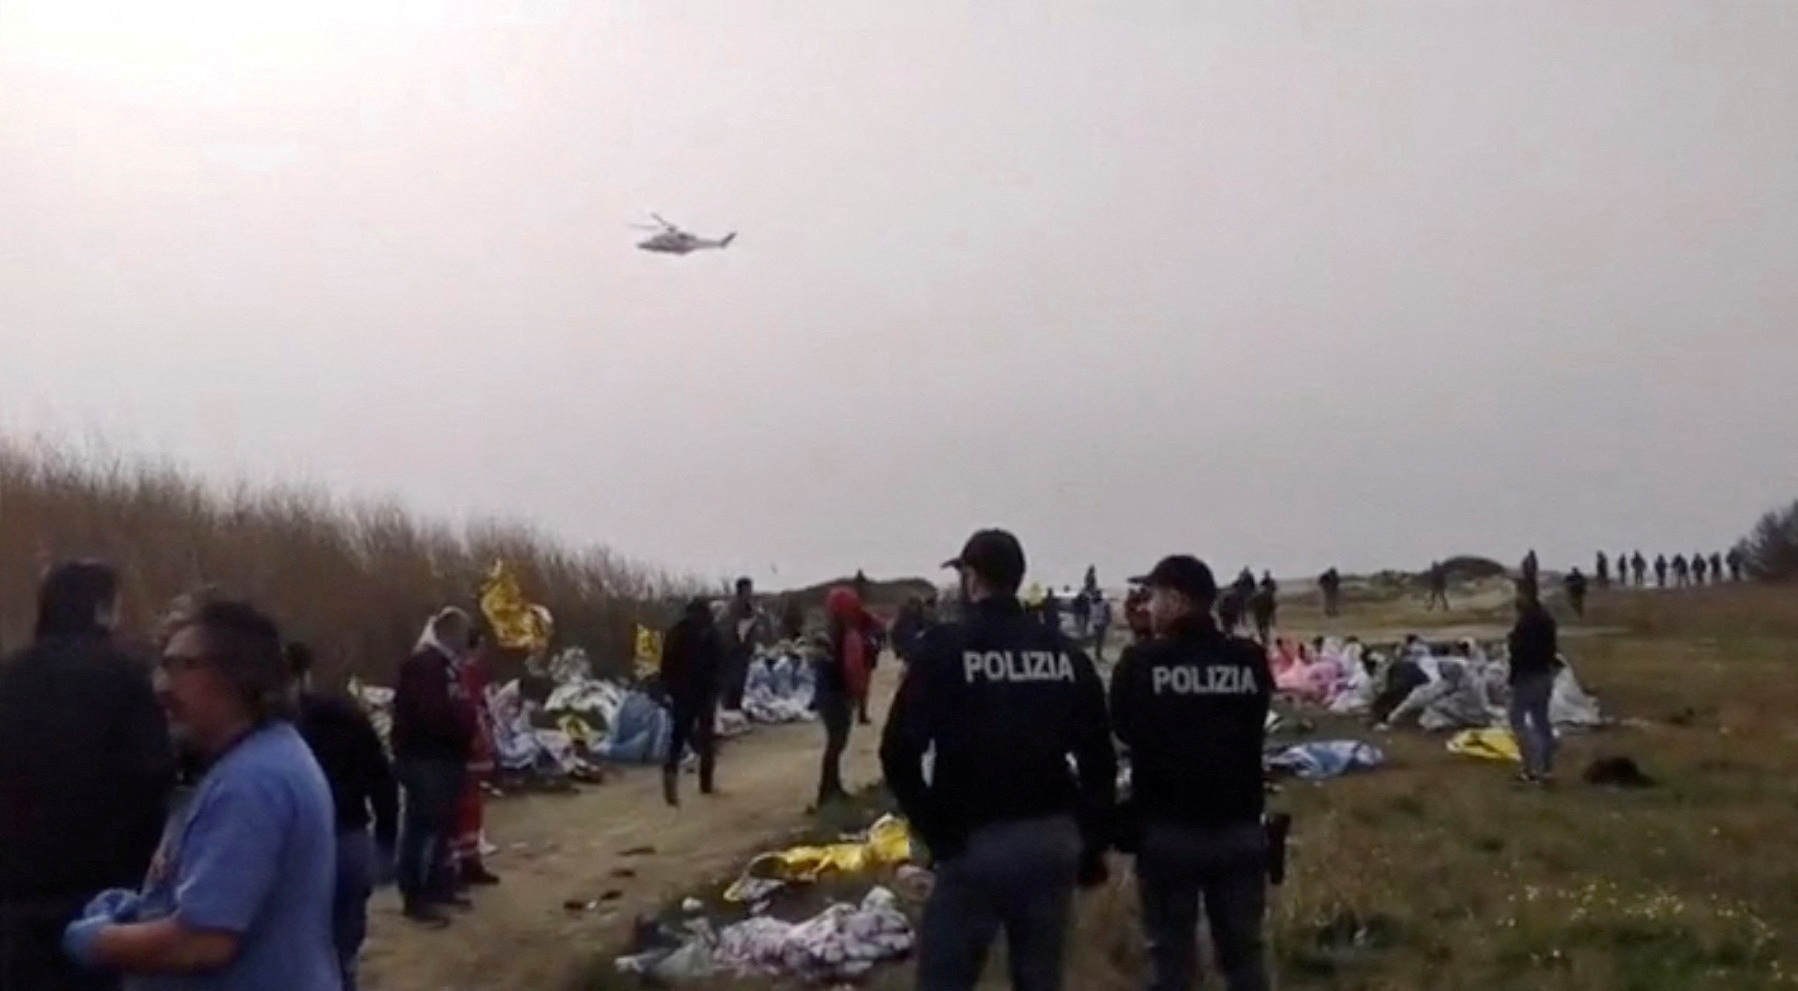 Rescue workers have attempted to find more survivors from the wreck. /Italian Police / Reuters